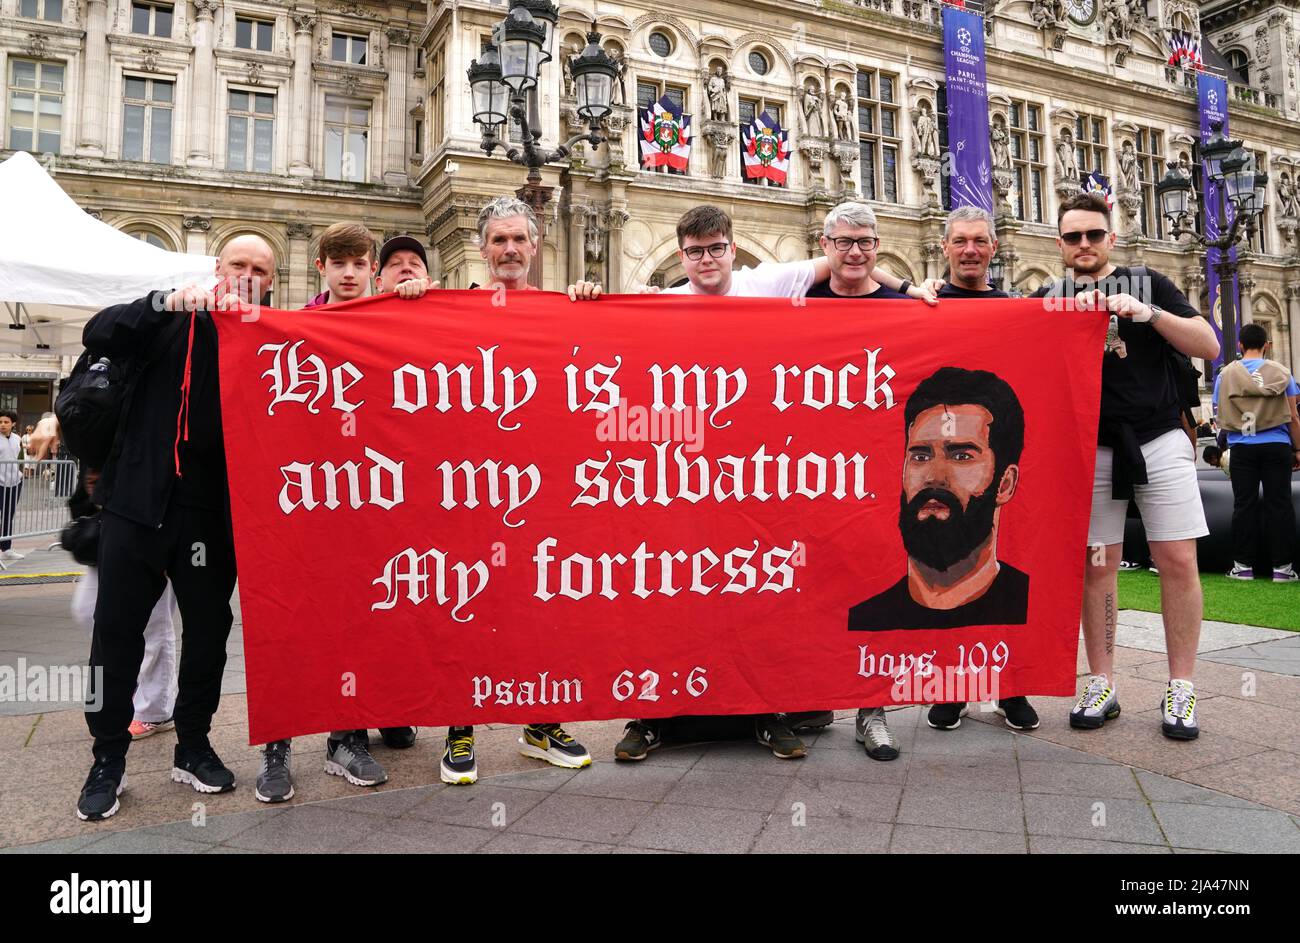 Liverpool fans pose with a flag of support at the Trophy Experience at The Place de l'Hotel de Ville in Paris ahead of Saturday's UEFA Champions League Final at the Stade de France, Paris. Picture date: Friday May 27, 2022. Stock Photo